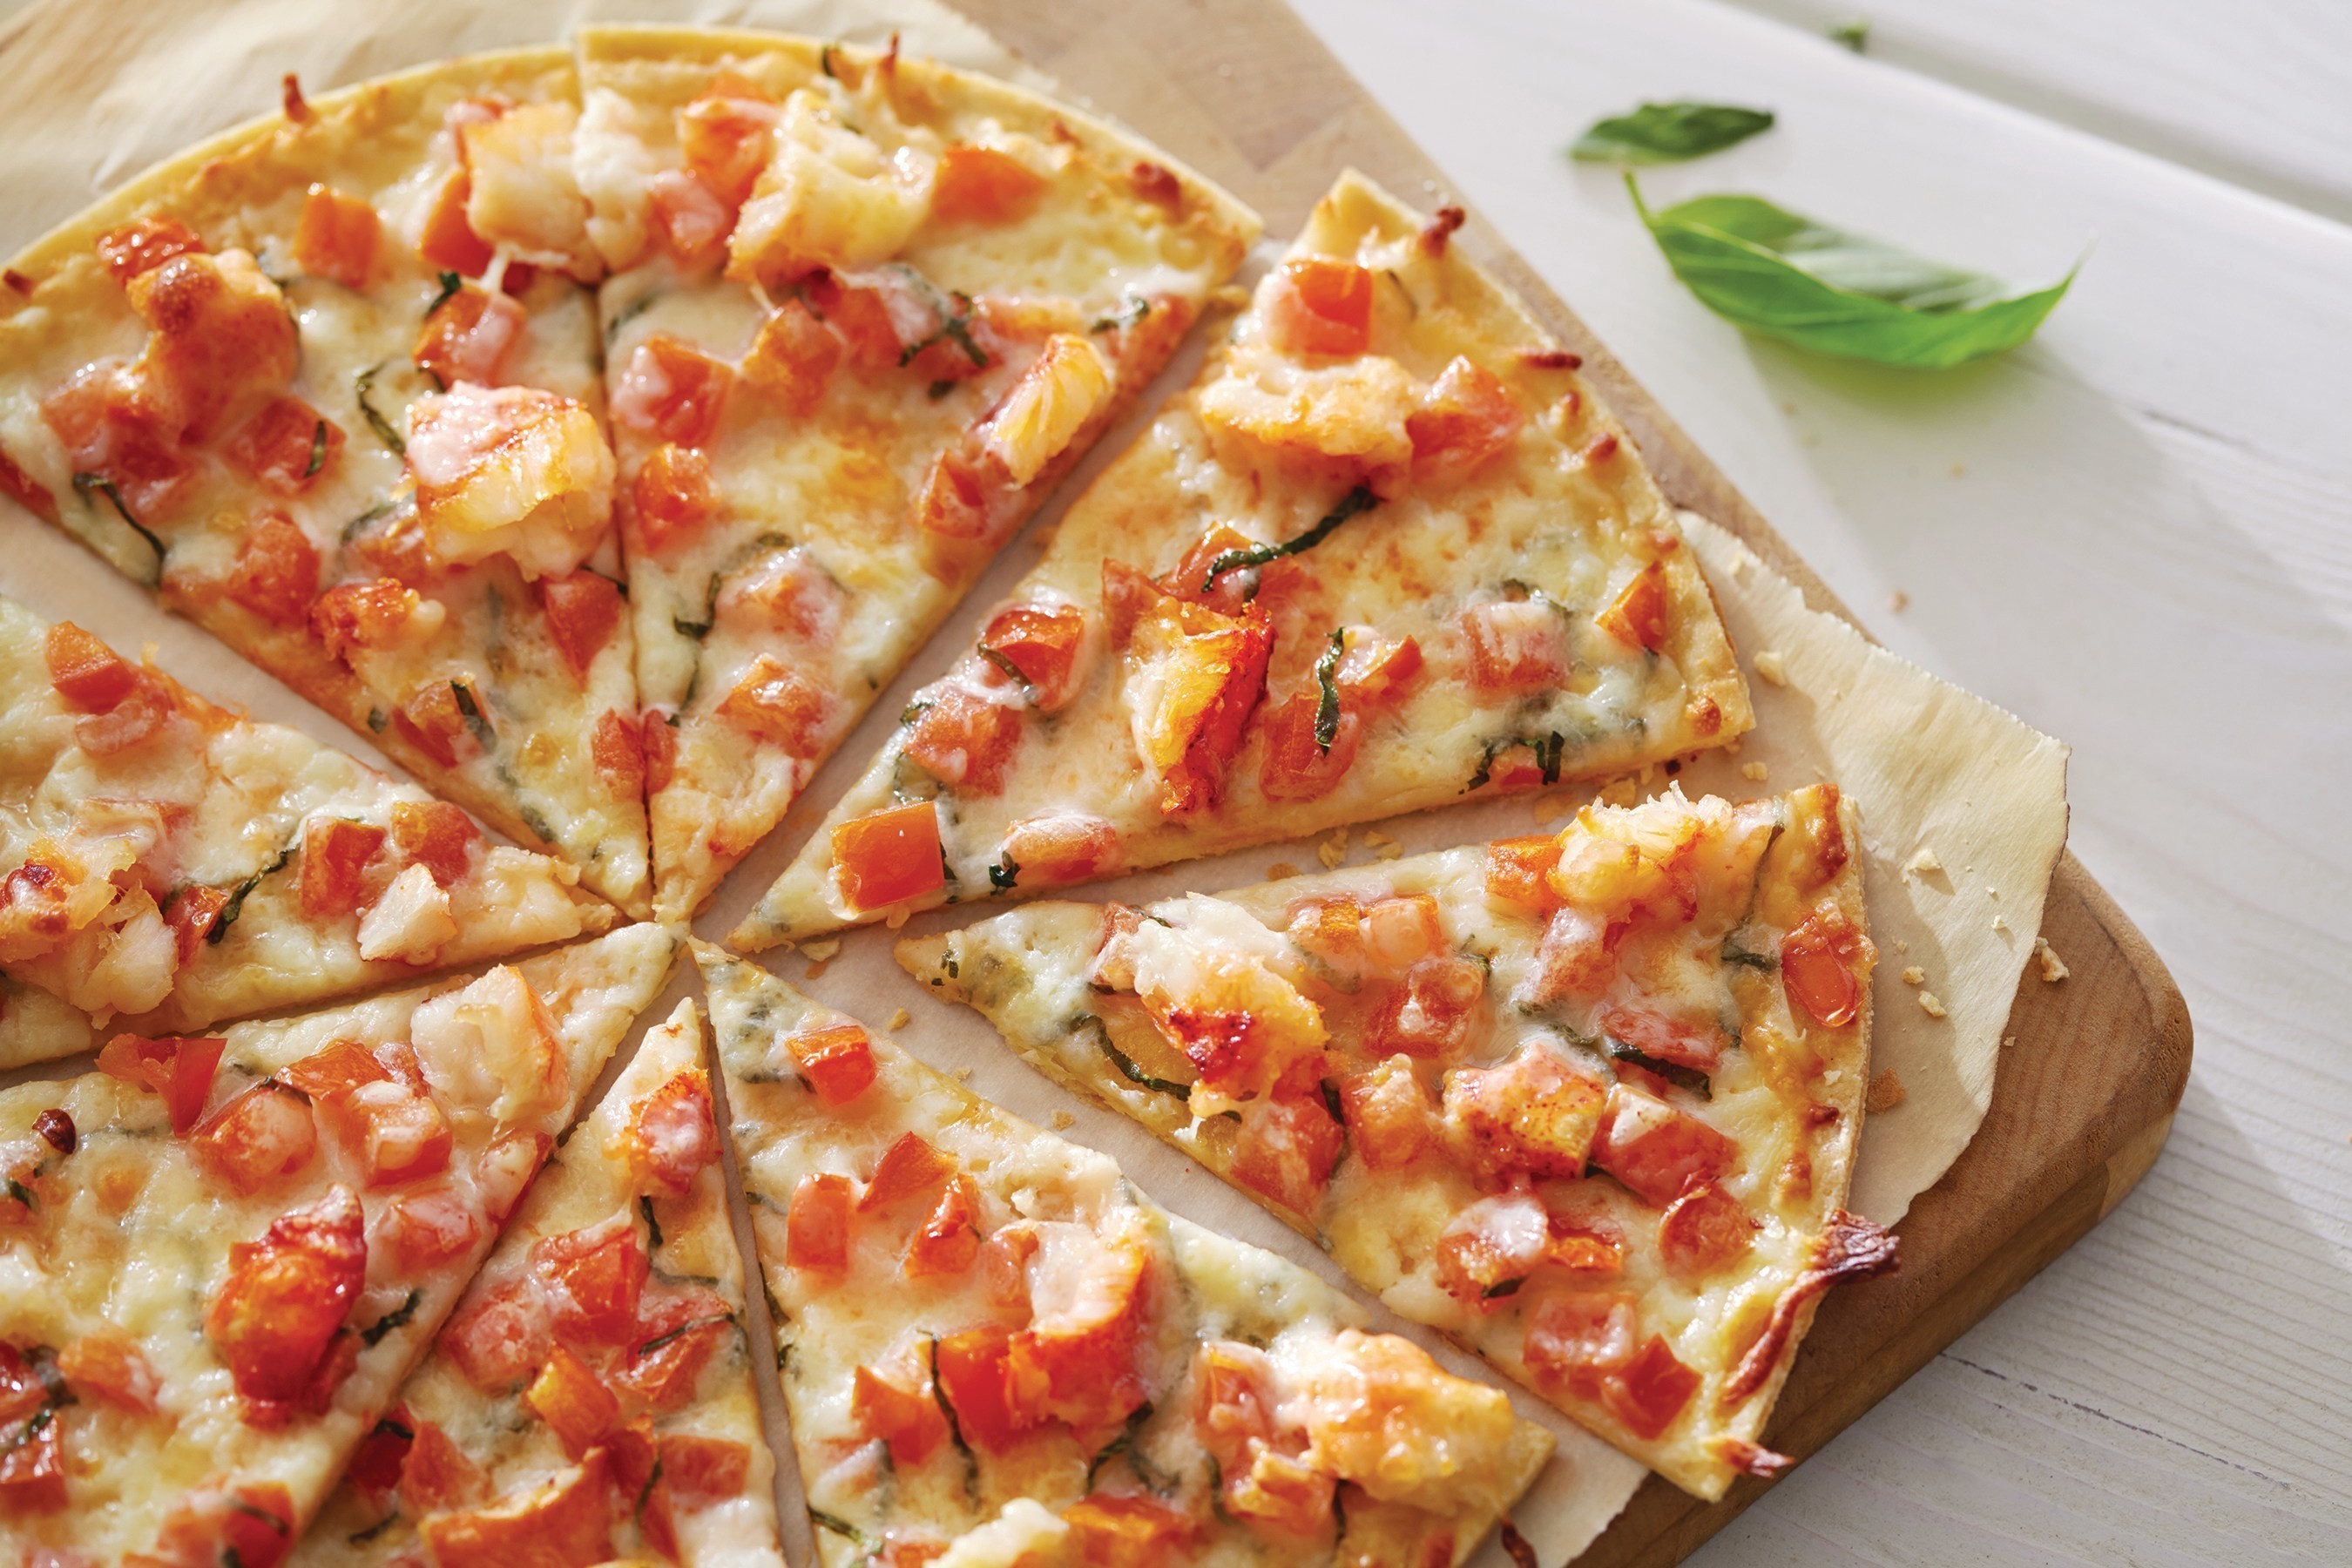 Red Lobster's Lobster Pizza is one of a variety of appetizers and desserts to choose from this Veterans Day.